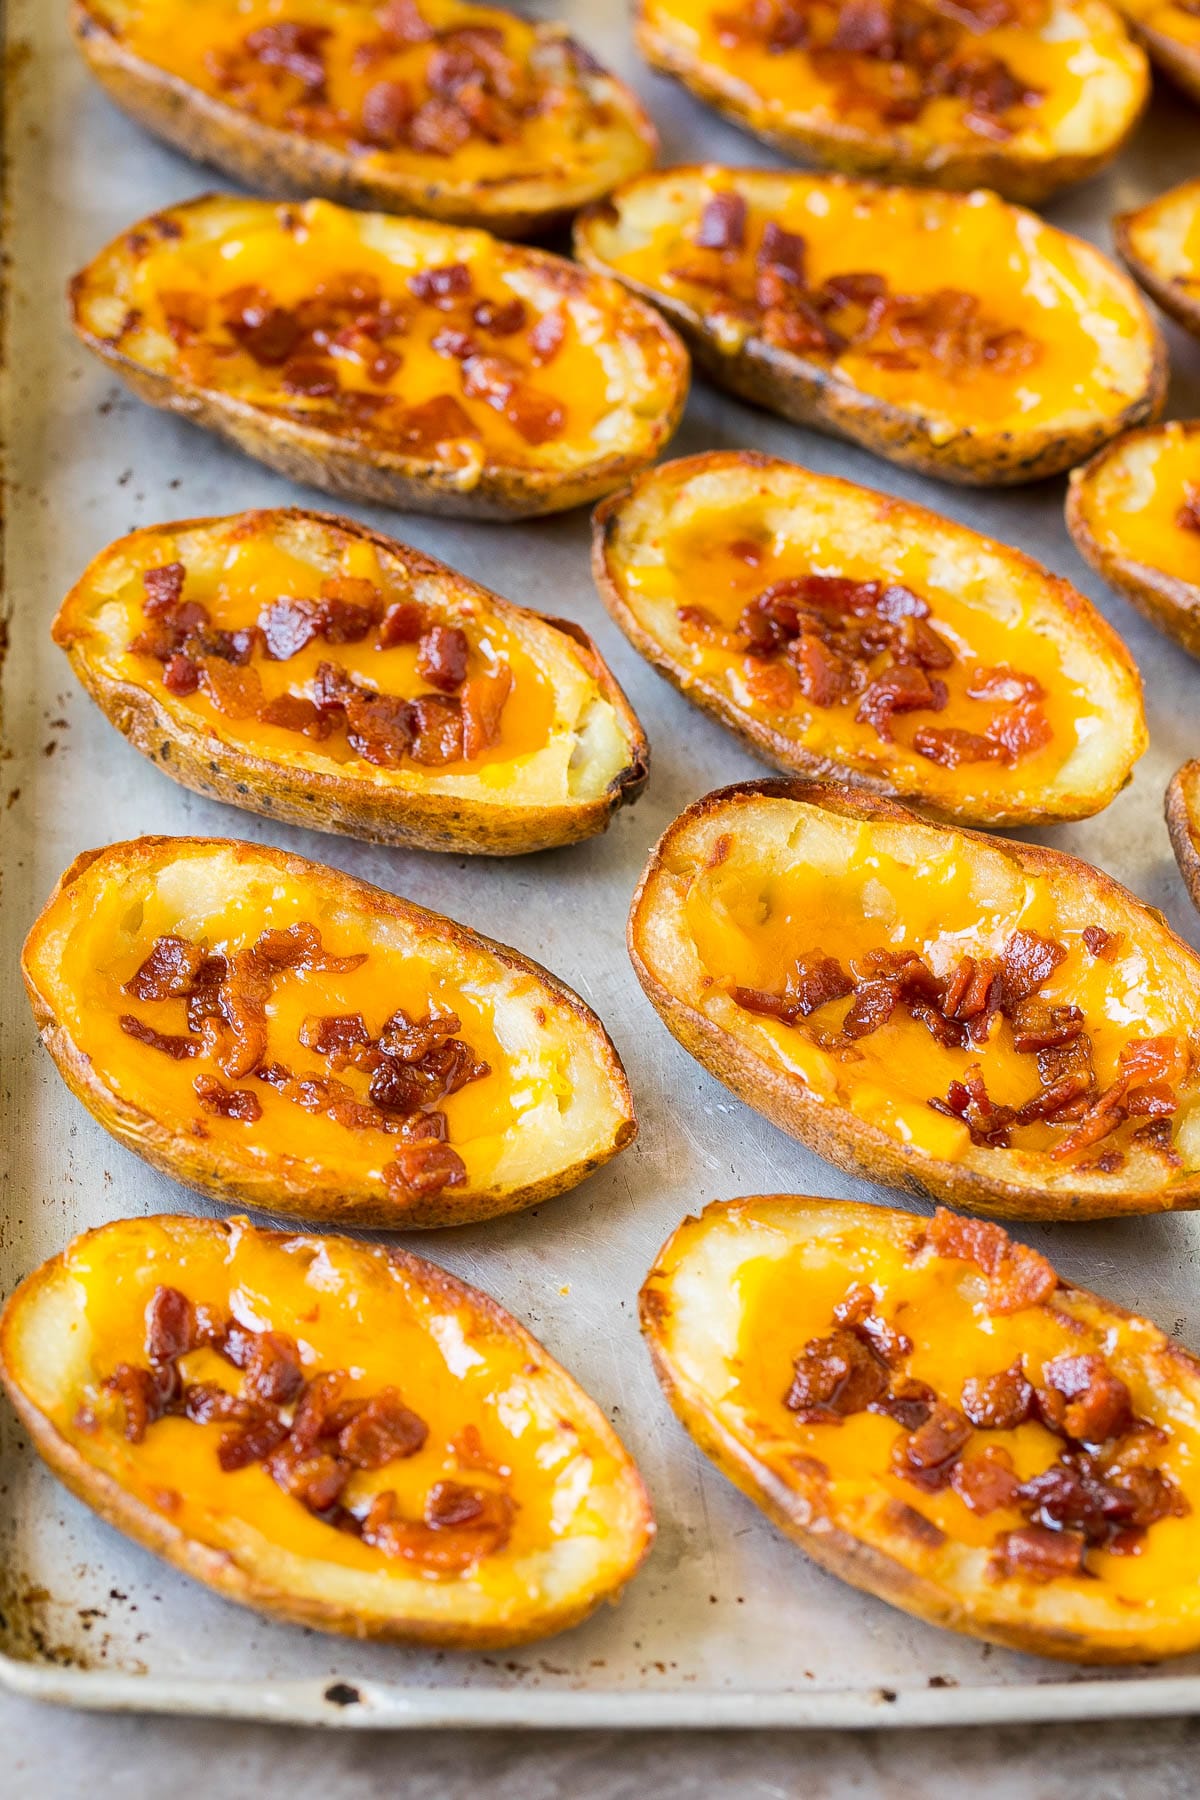 Spud halves topped with bacon and cheese.